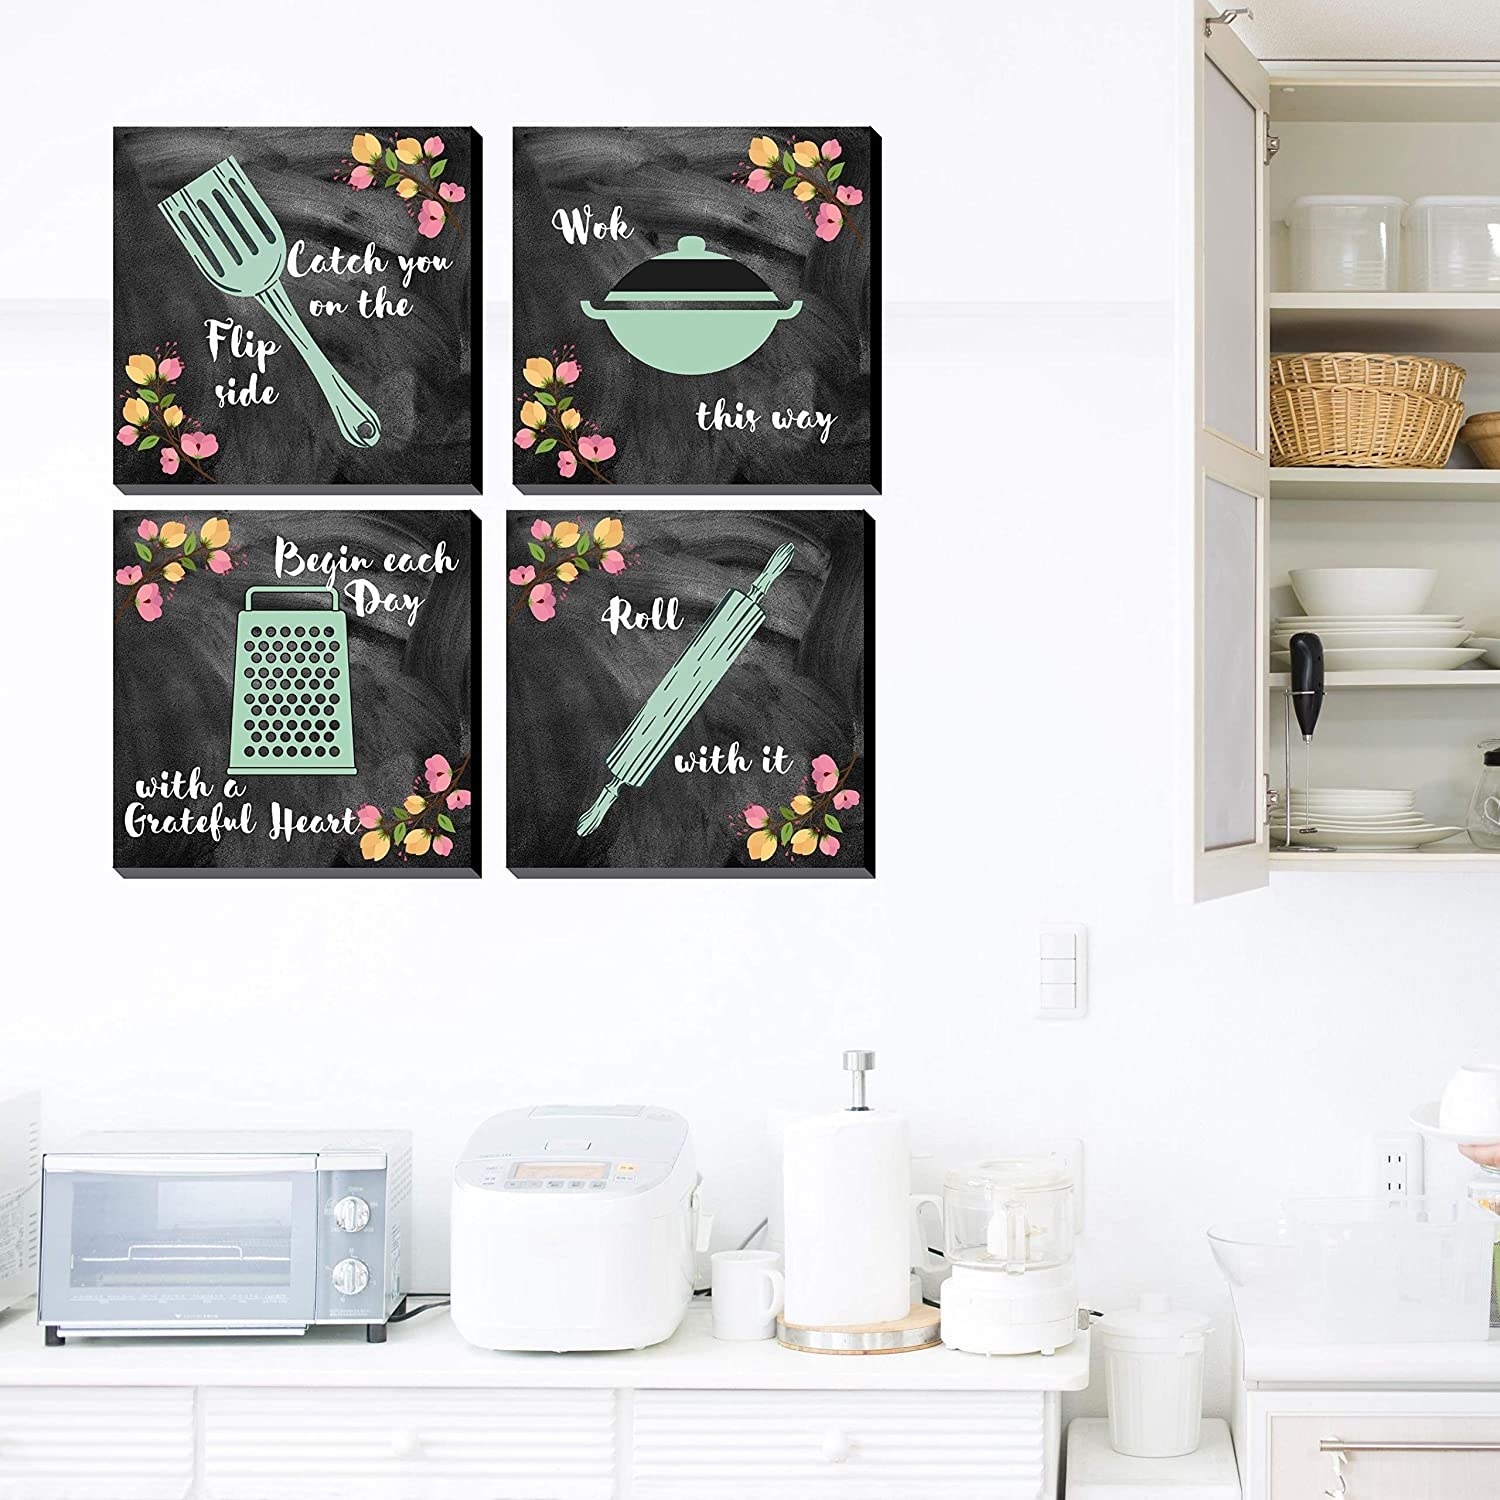 A set of chalkboard paintings on the wall in the kitchen.